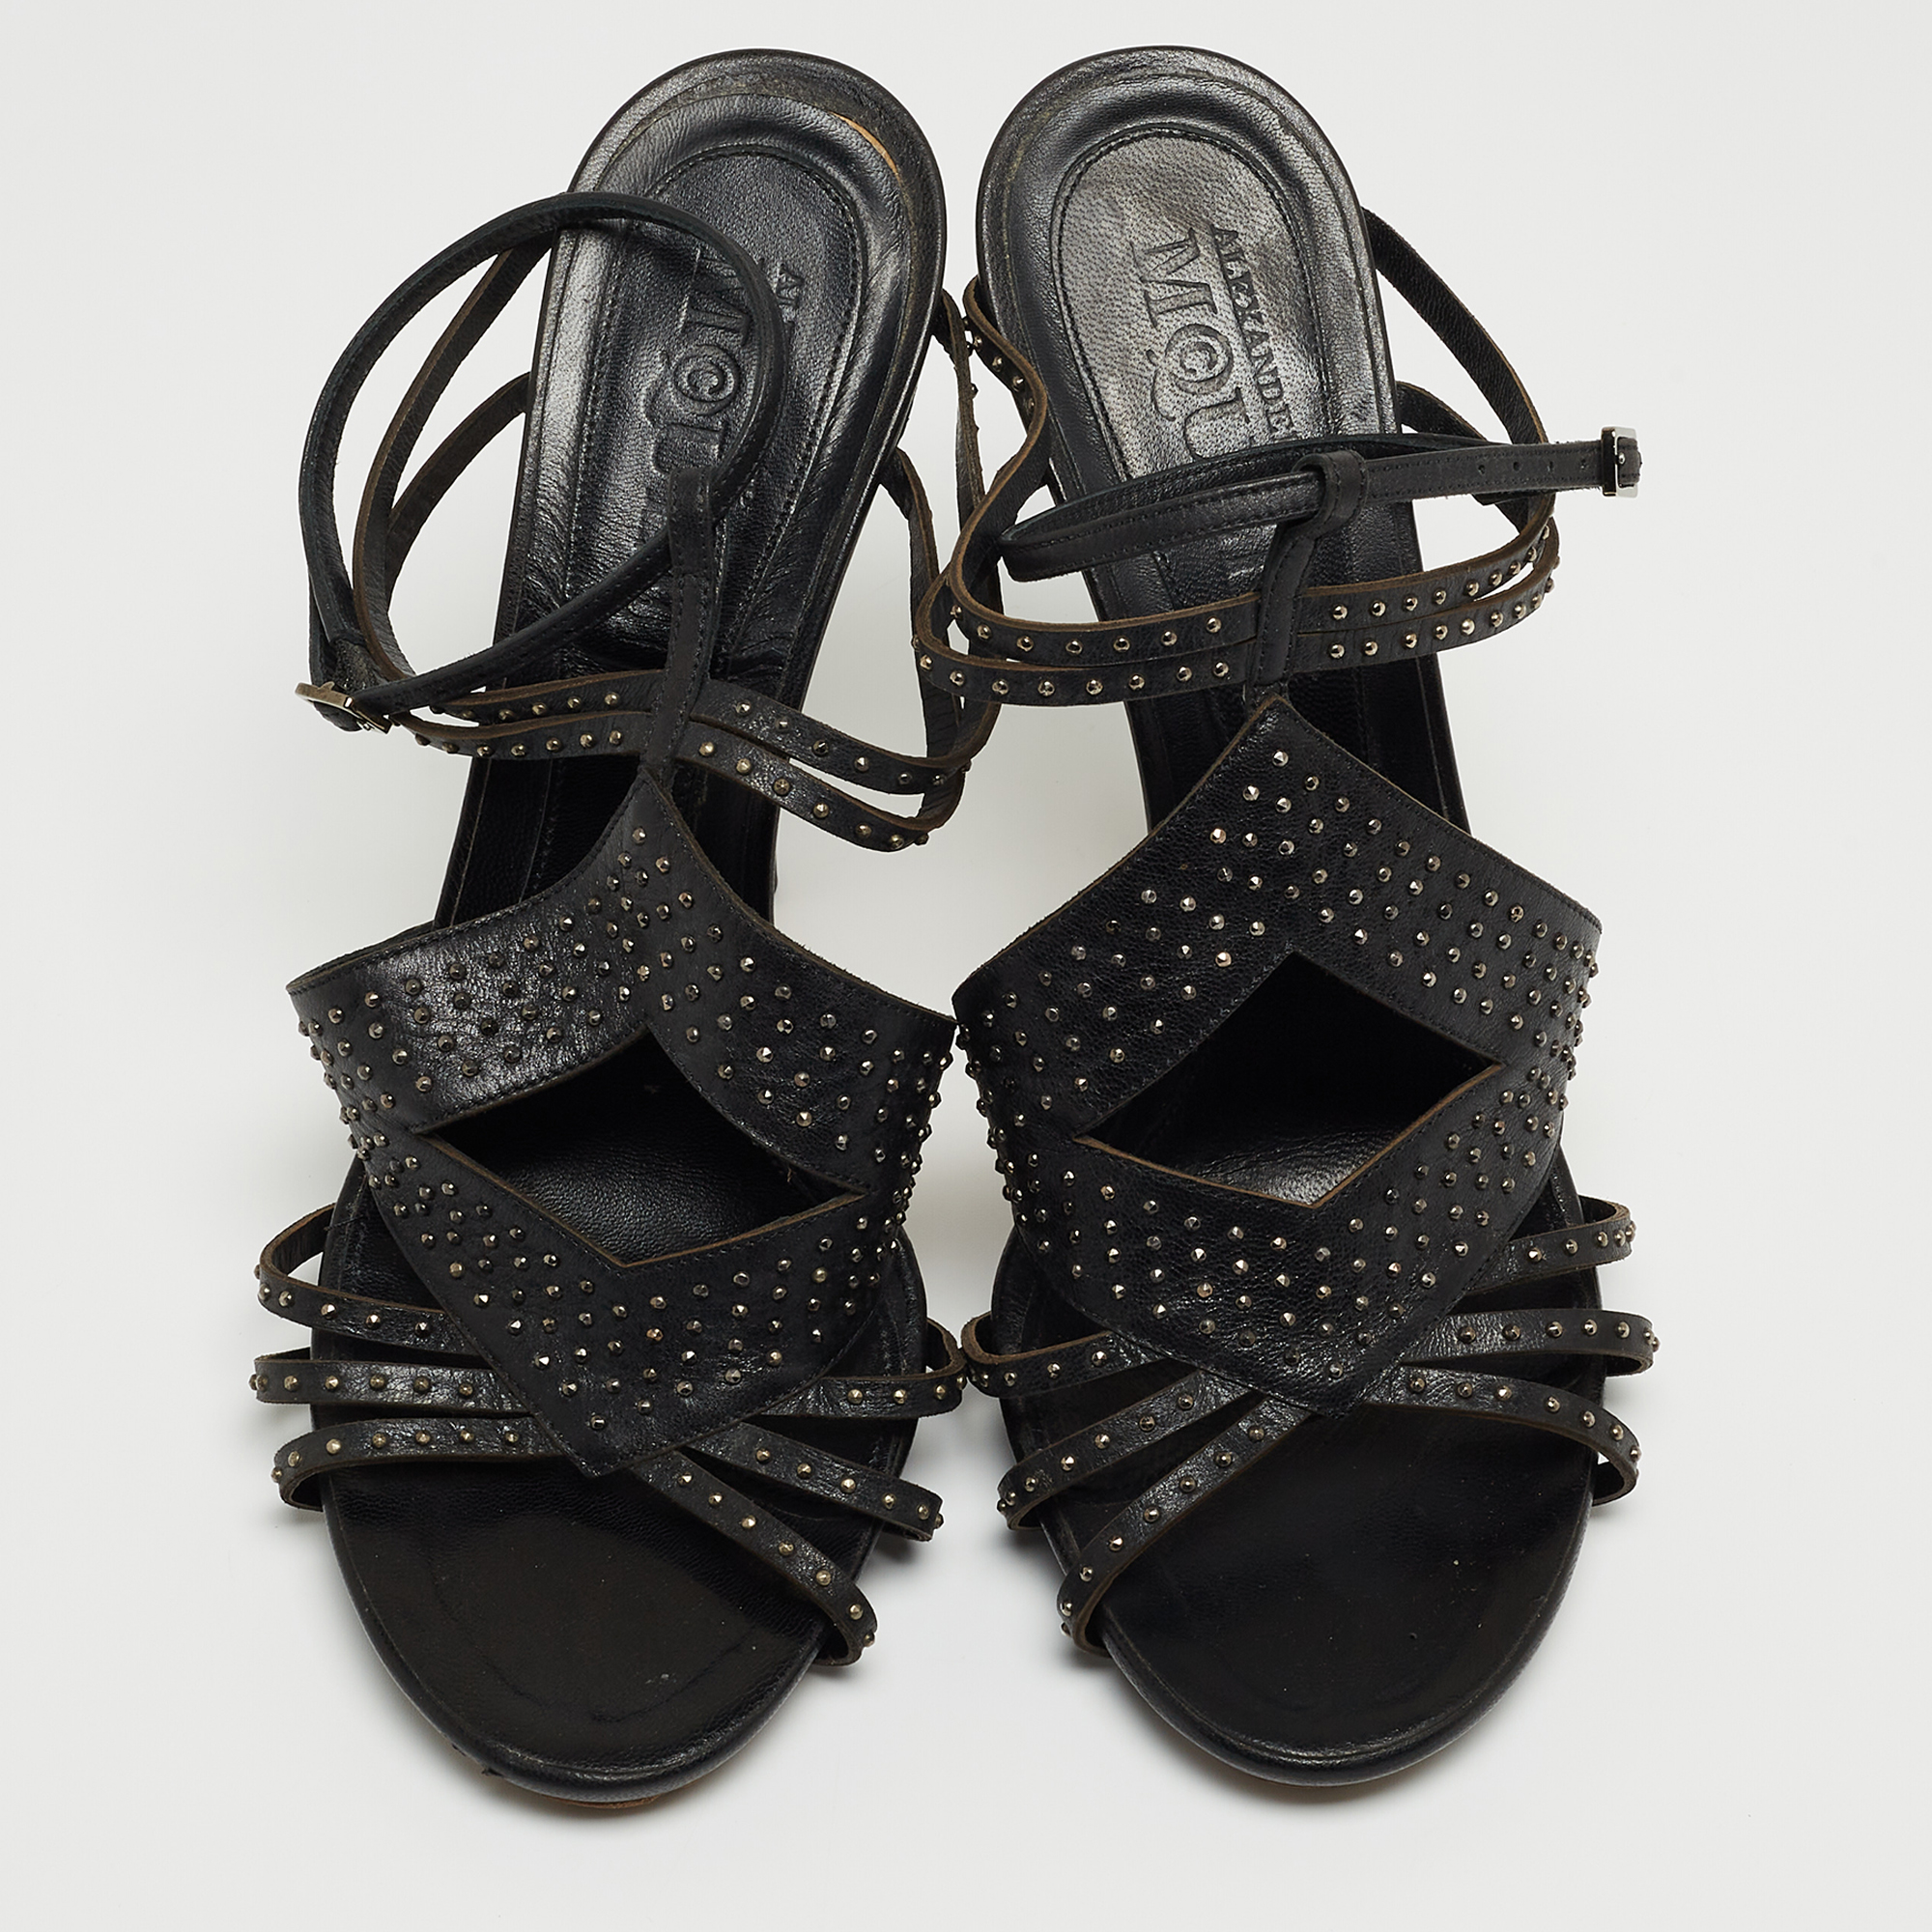 Alexander McQueen Black Leather Studded Caged Sandals Size 40